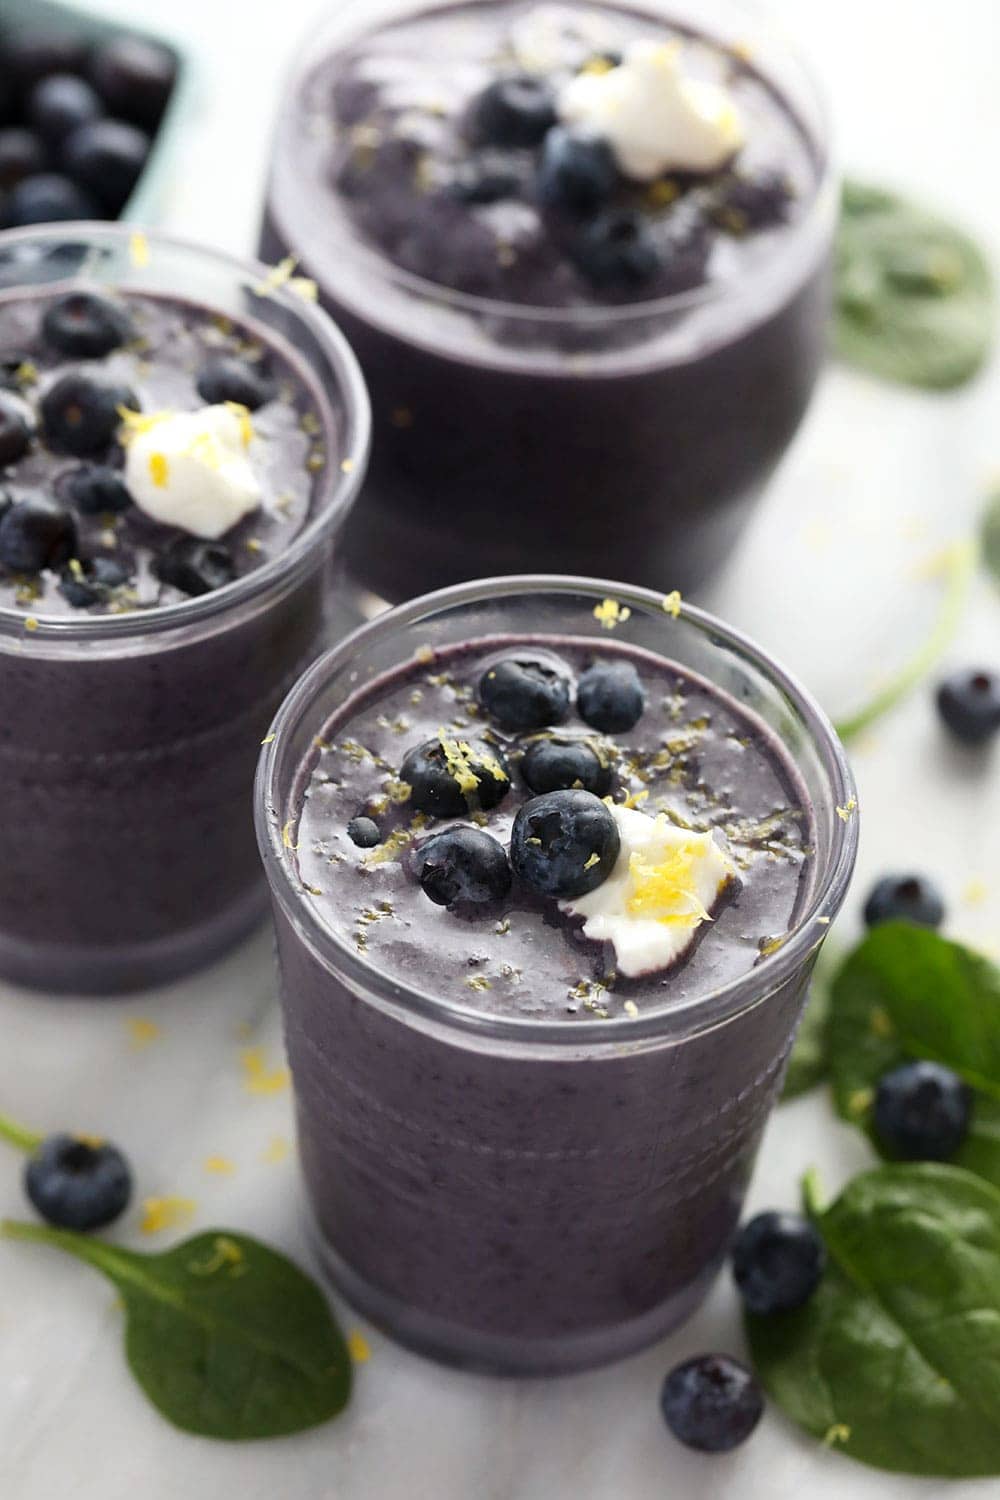 Blueberry smoothie in a mug.